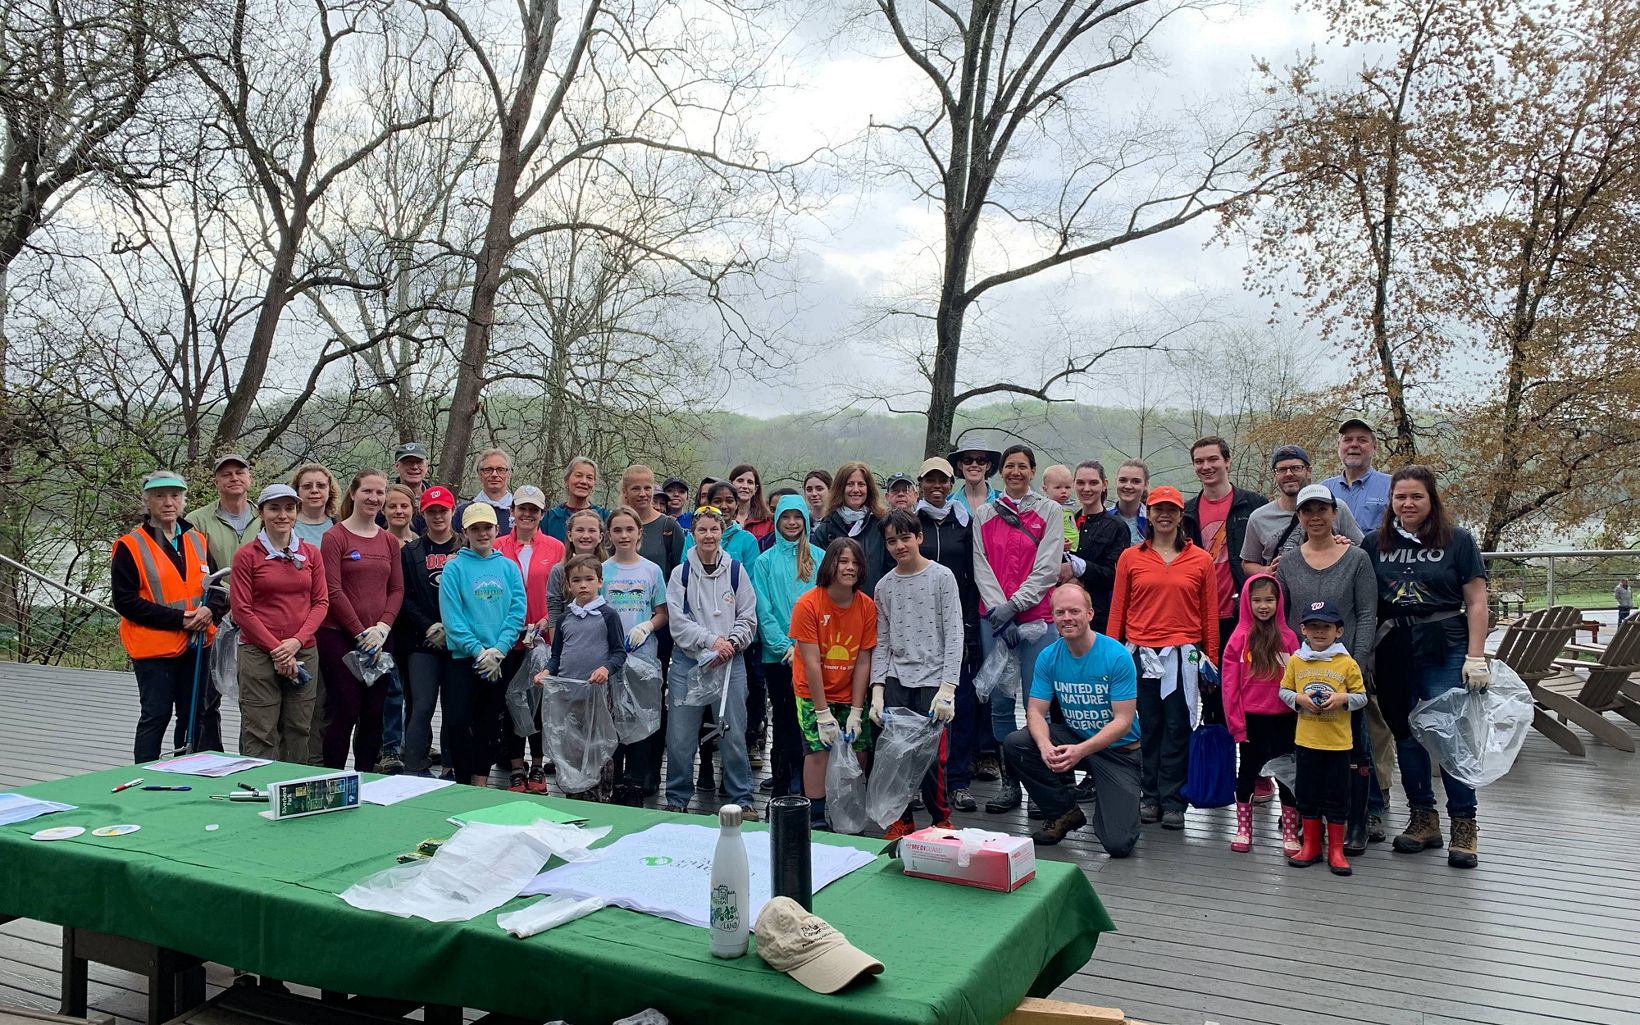 A large group of volunteers pose before beginning an Earth Day cleanup.